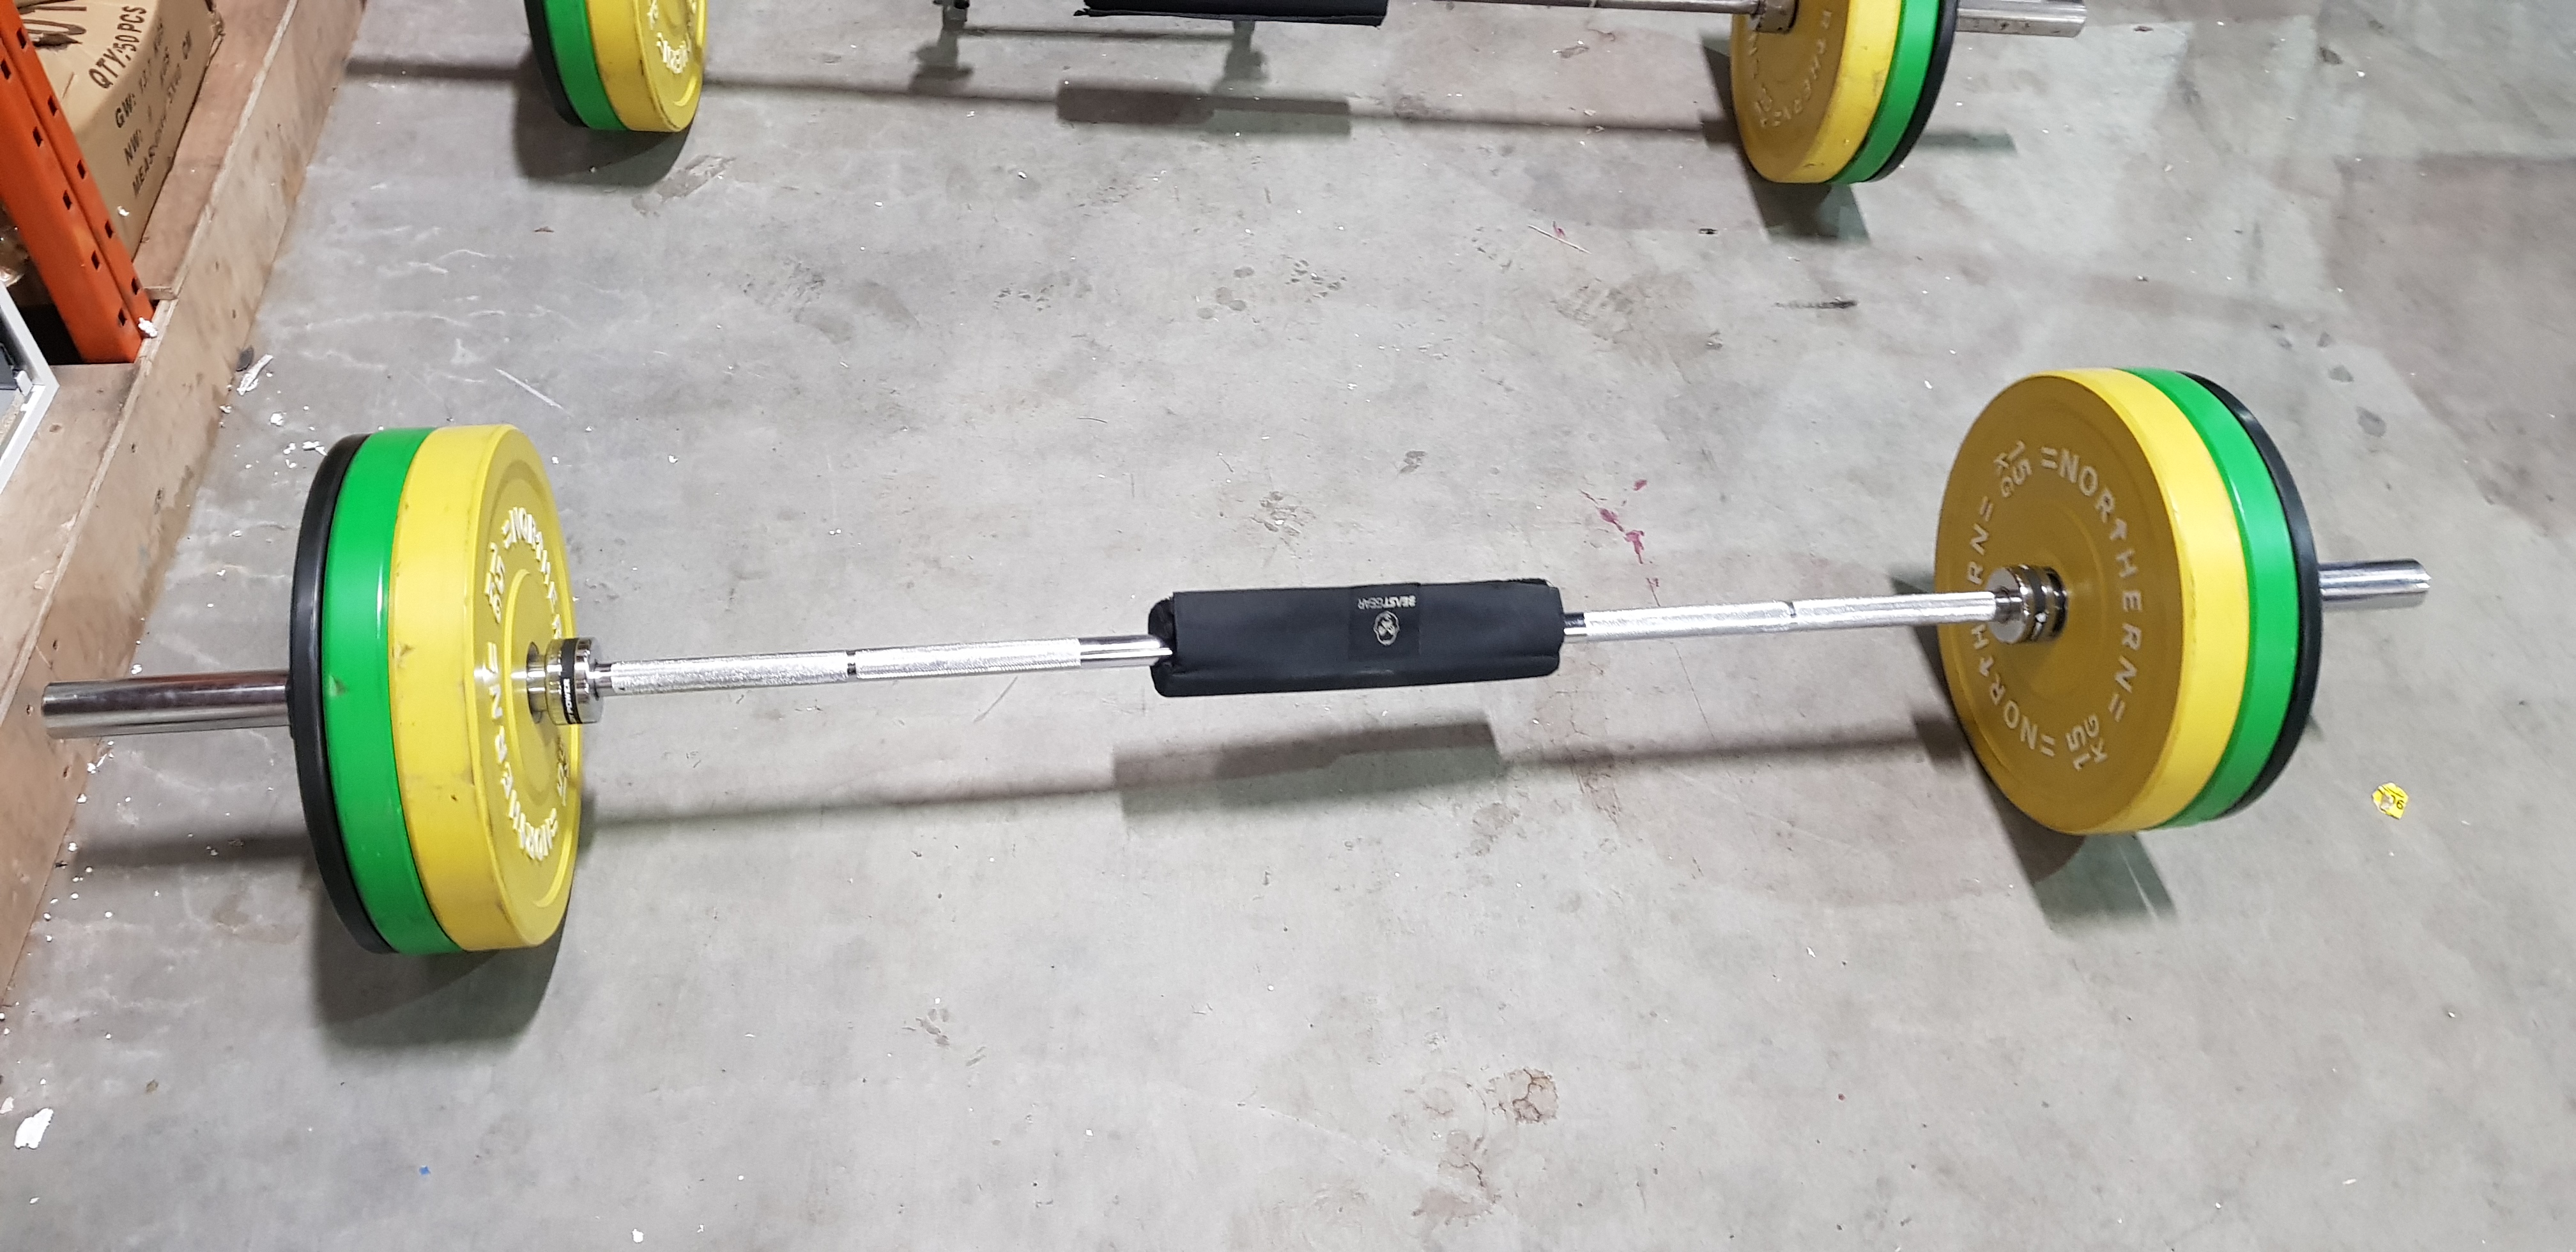 1 X OLYMPIC 20 KG BARBELL - WITH NORTHERN RUBBER WEIGHT PLATES - INCLUDES QUICK RELEASE CLIPS AND